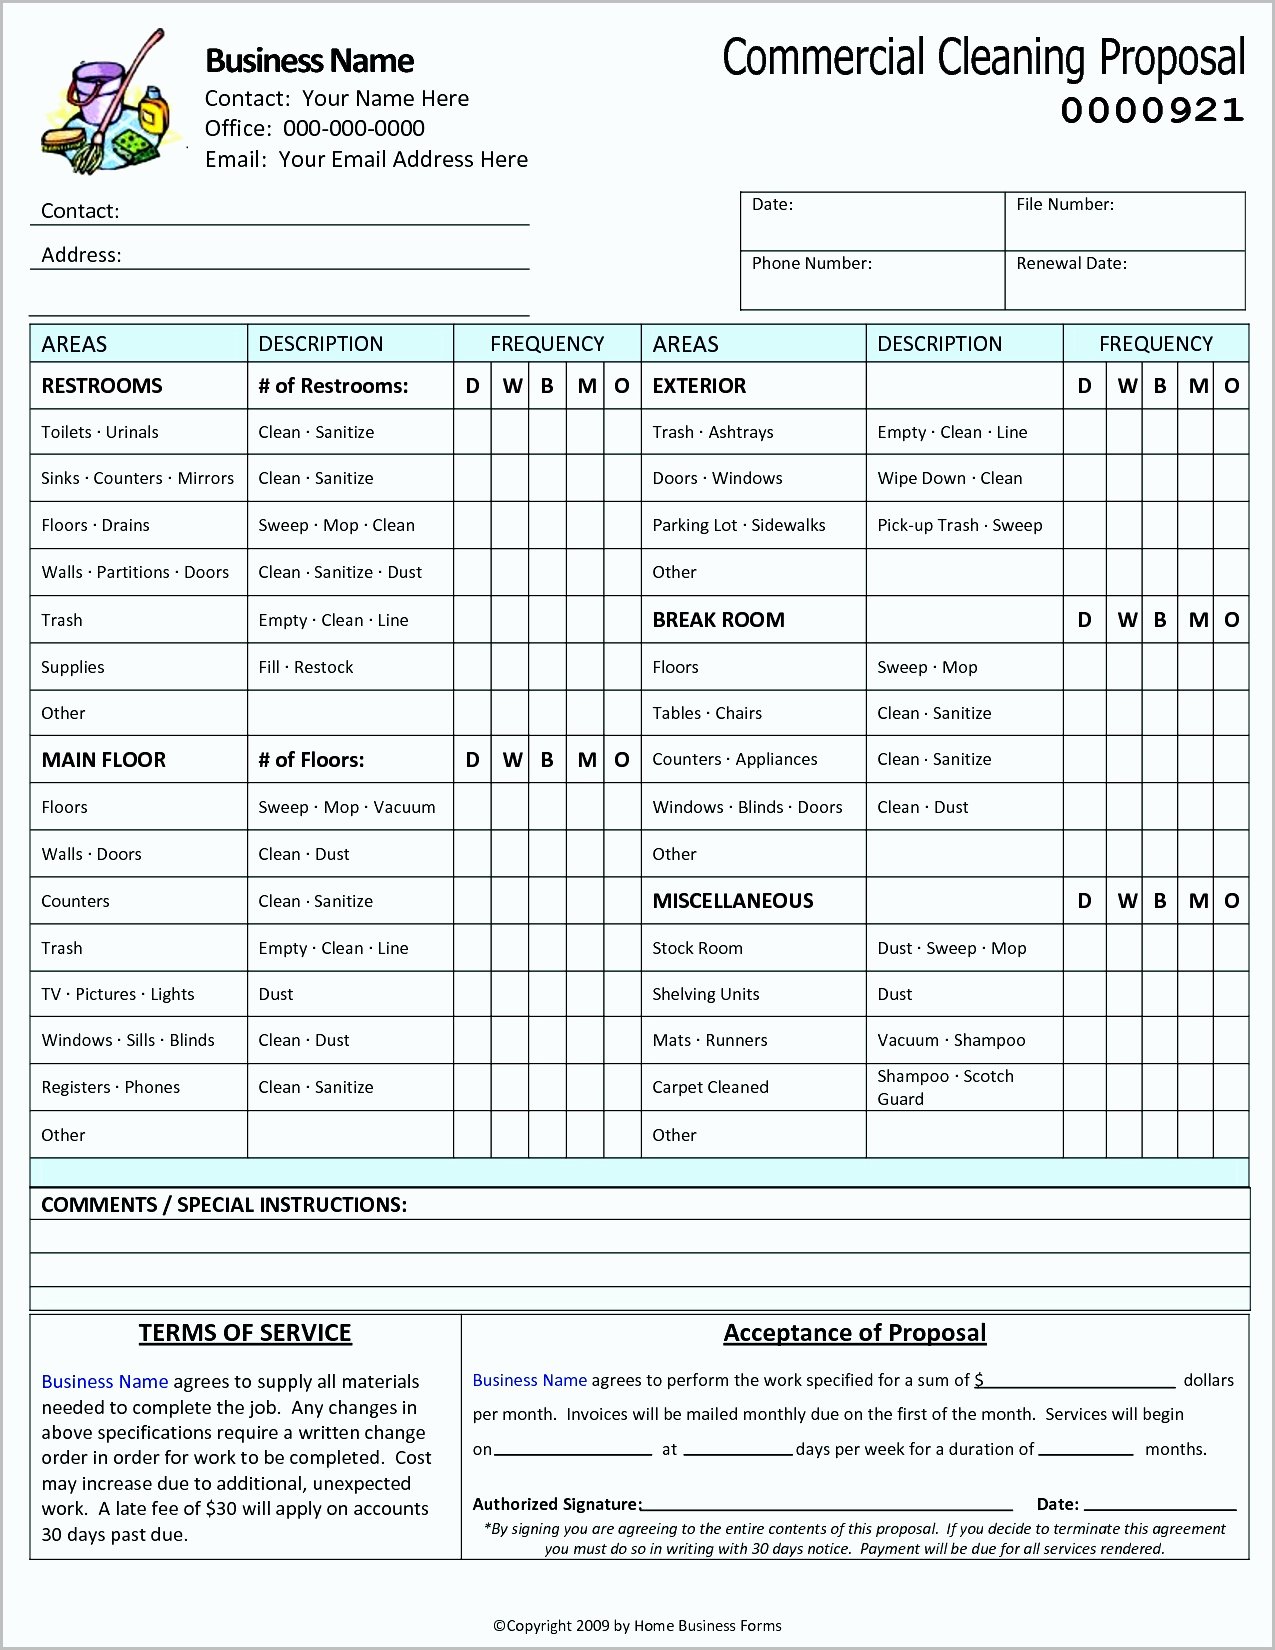 Commercial Cleaning Proposal Template Free Lovely Cleaning Bid Sheet – Emmamcintyrephotography